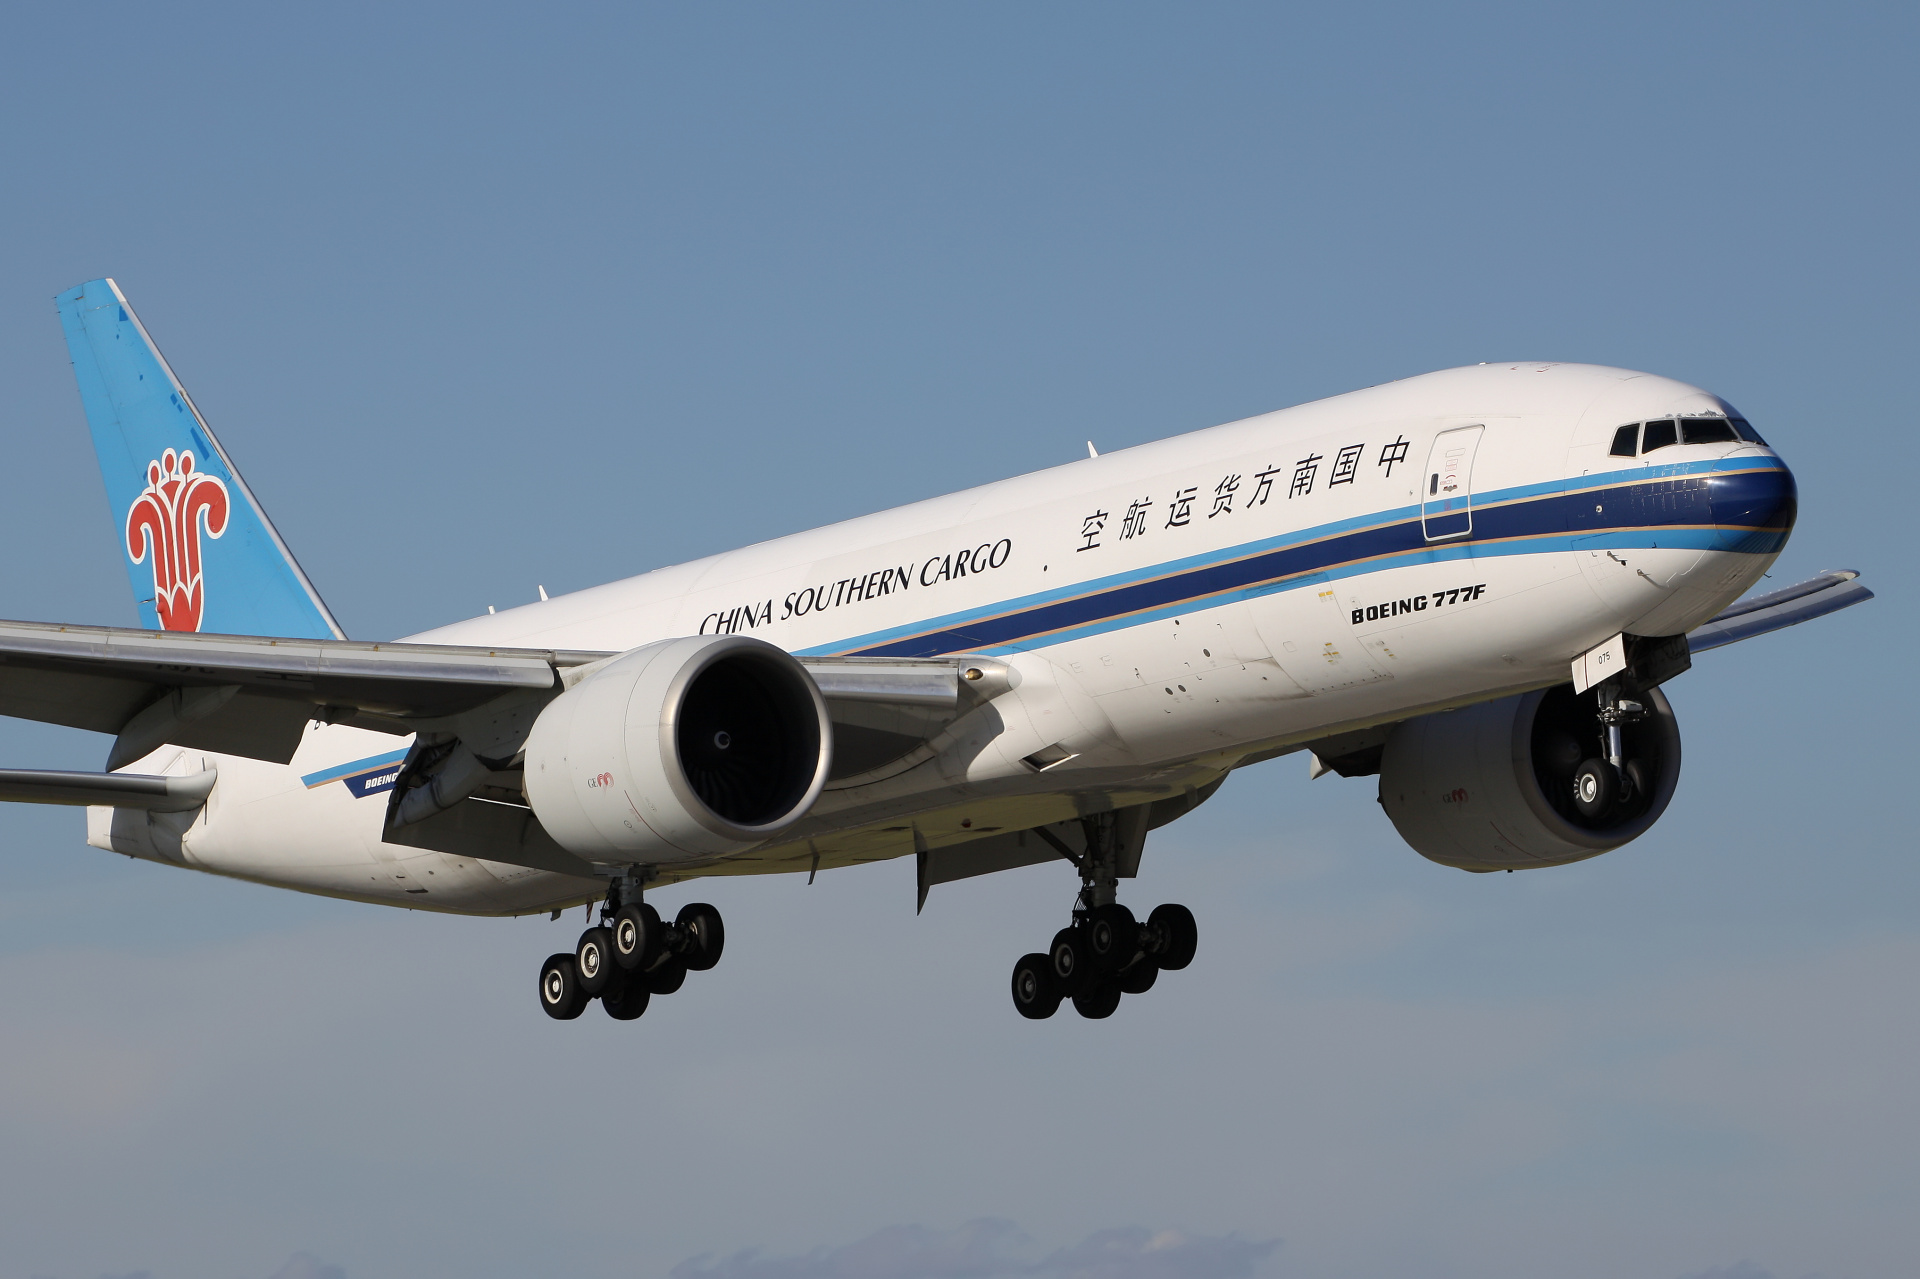 B-2075 (Aircraft » Schiphol Spotting » Boeing 777F » China Southern Cargo)